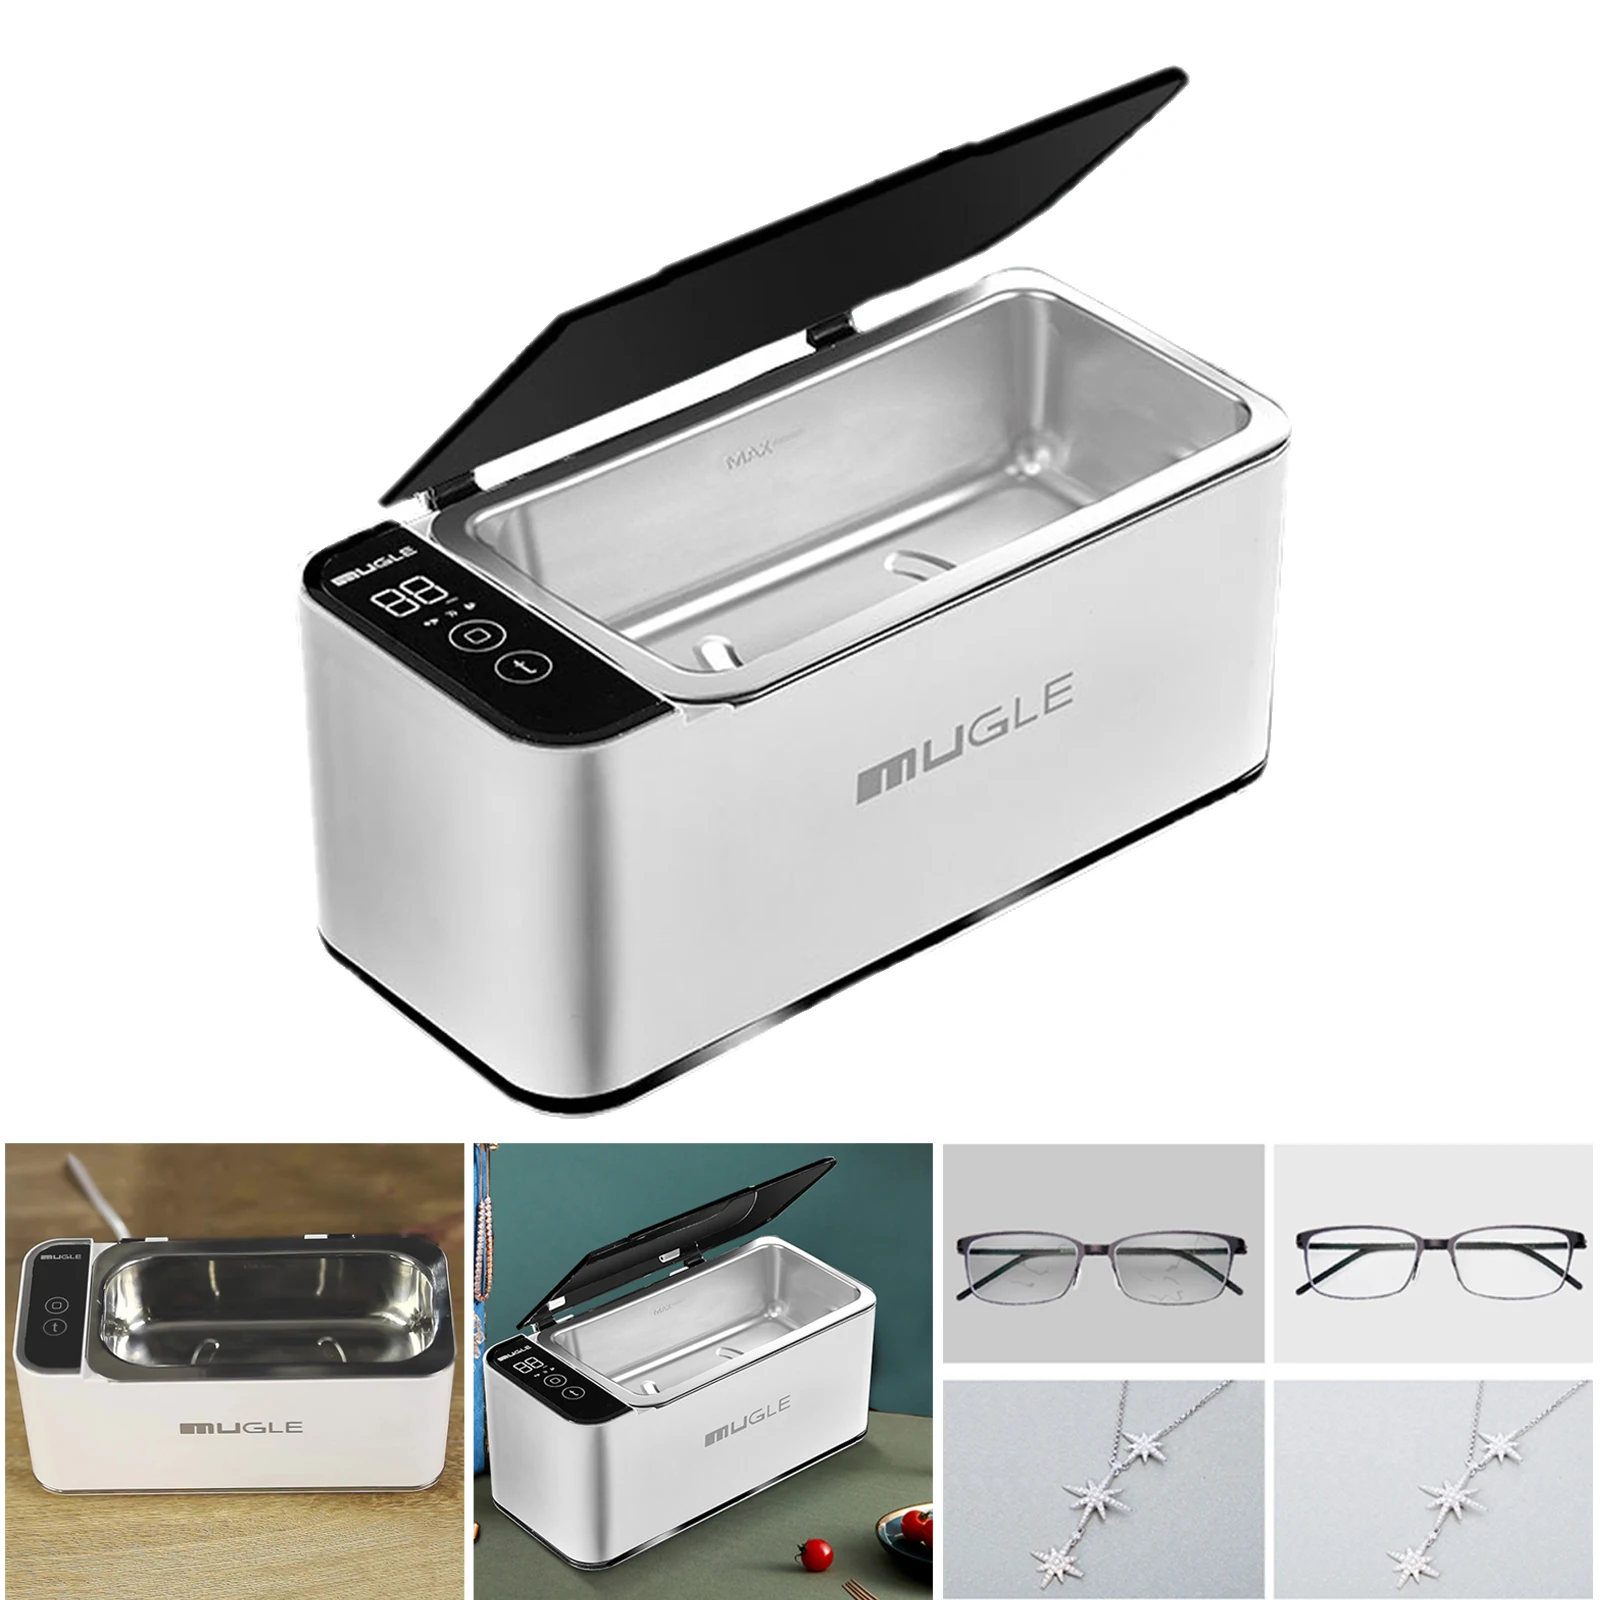 Professional Ultrasonic Jewelry Cleaner with Digital Timer for Eyeglasses, Rings, Coins (White)